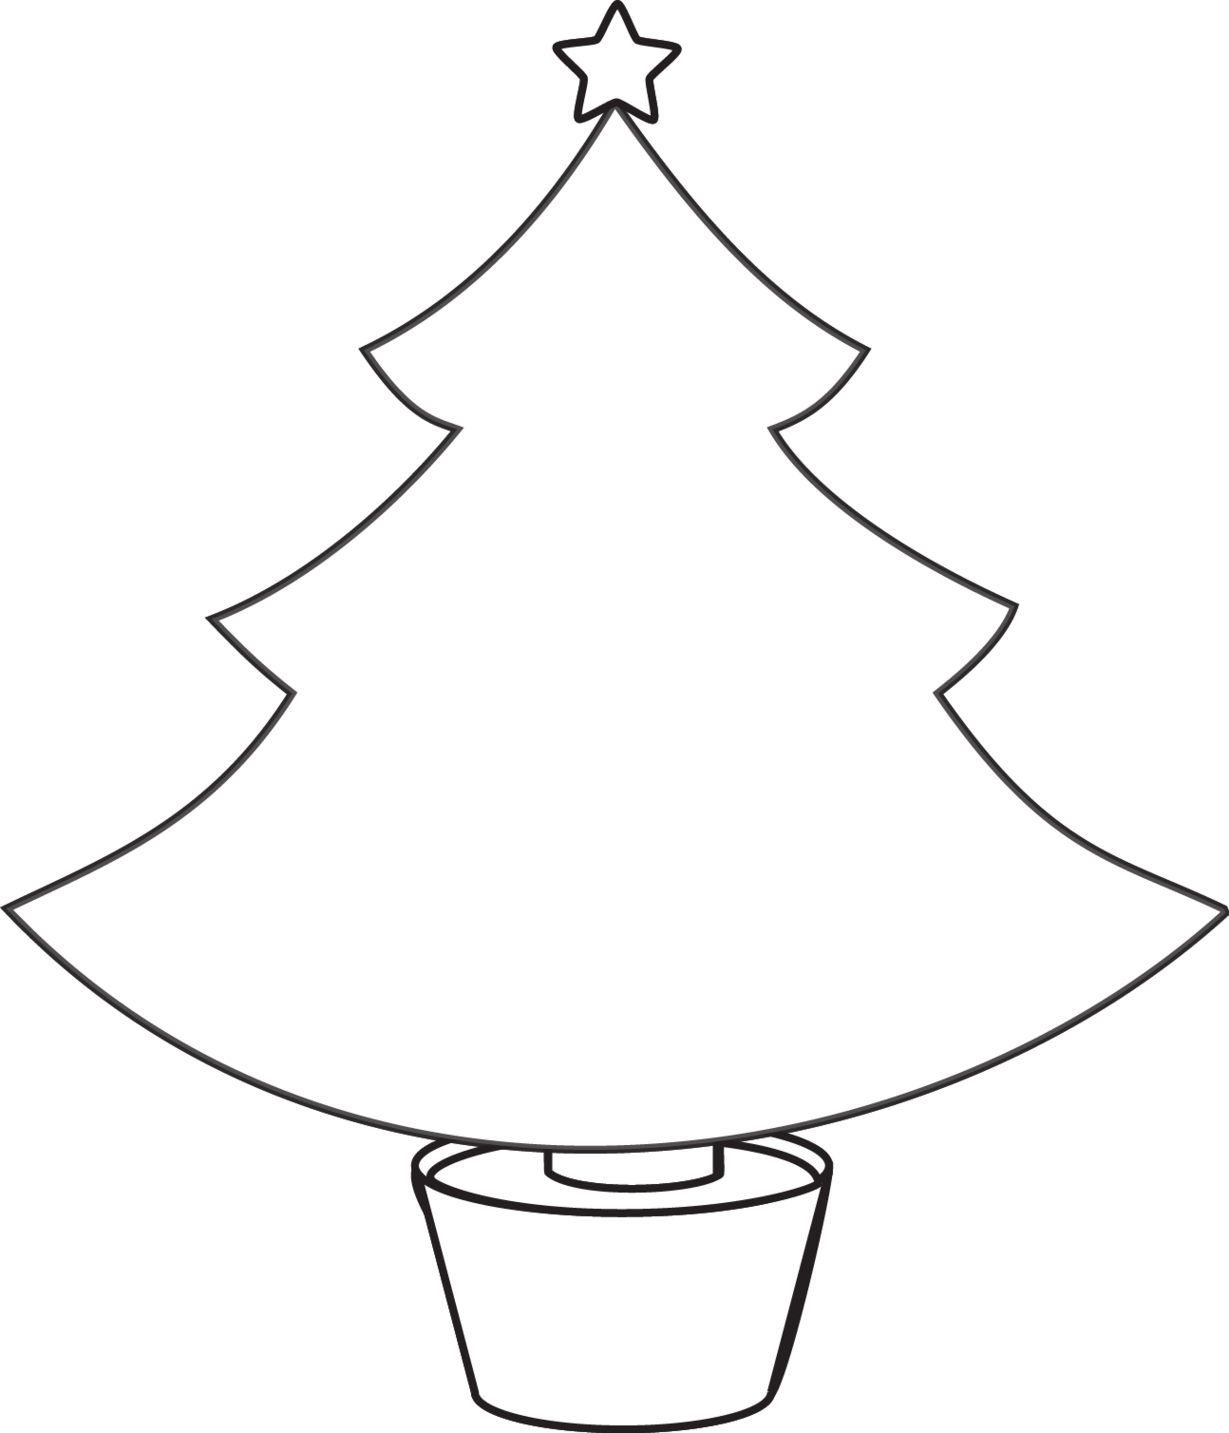 Plain Christmas Tree Digital Stamp Clipart - Free to use Clip Art ...